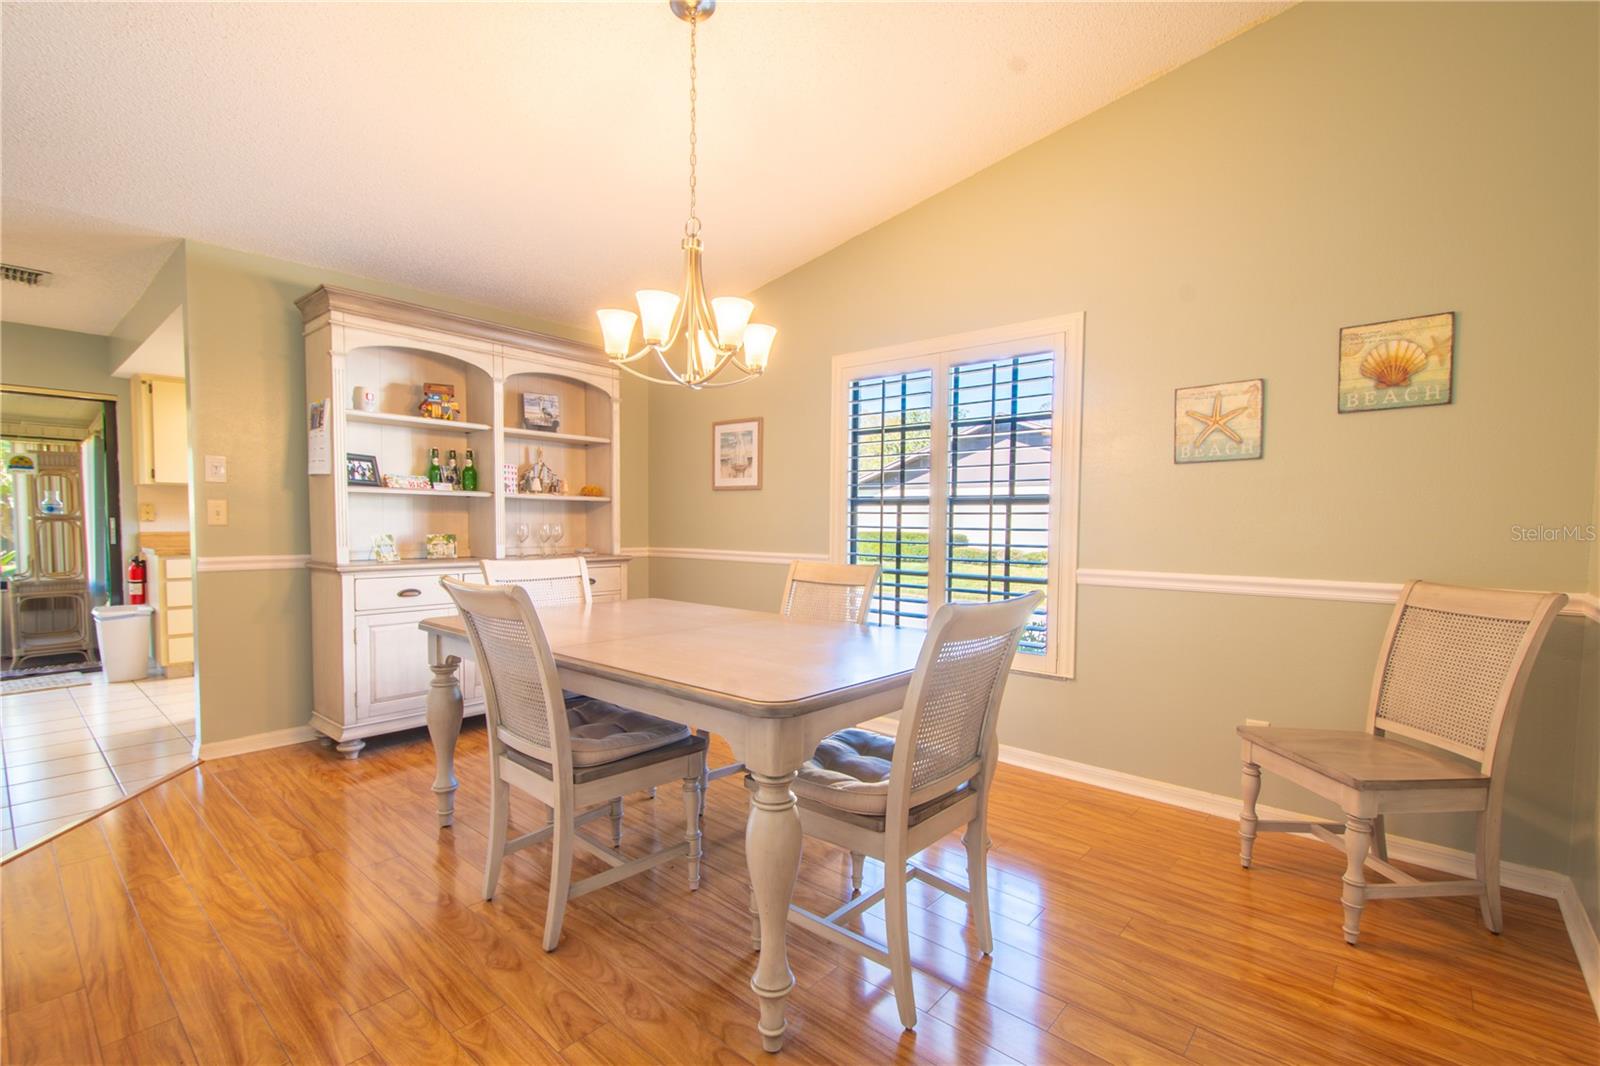 The dining room features an stylish chandelier and plantation shutters